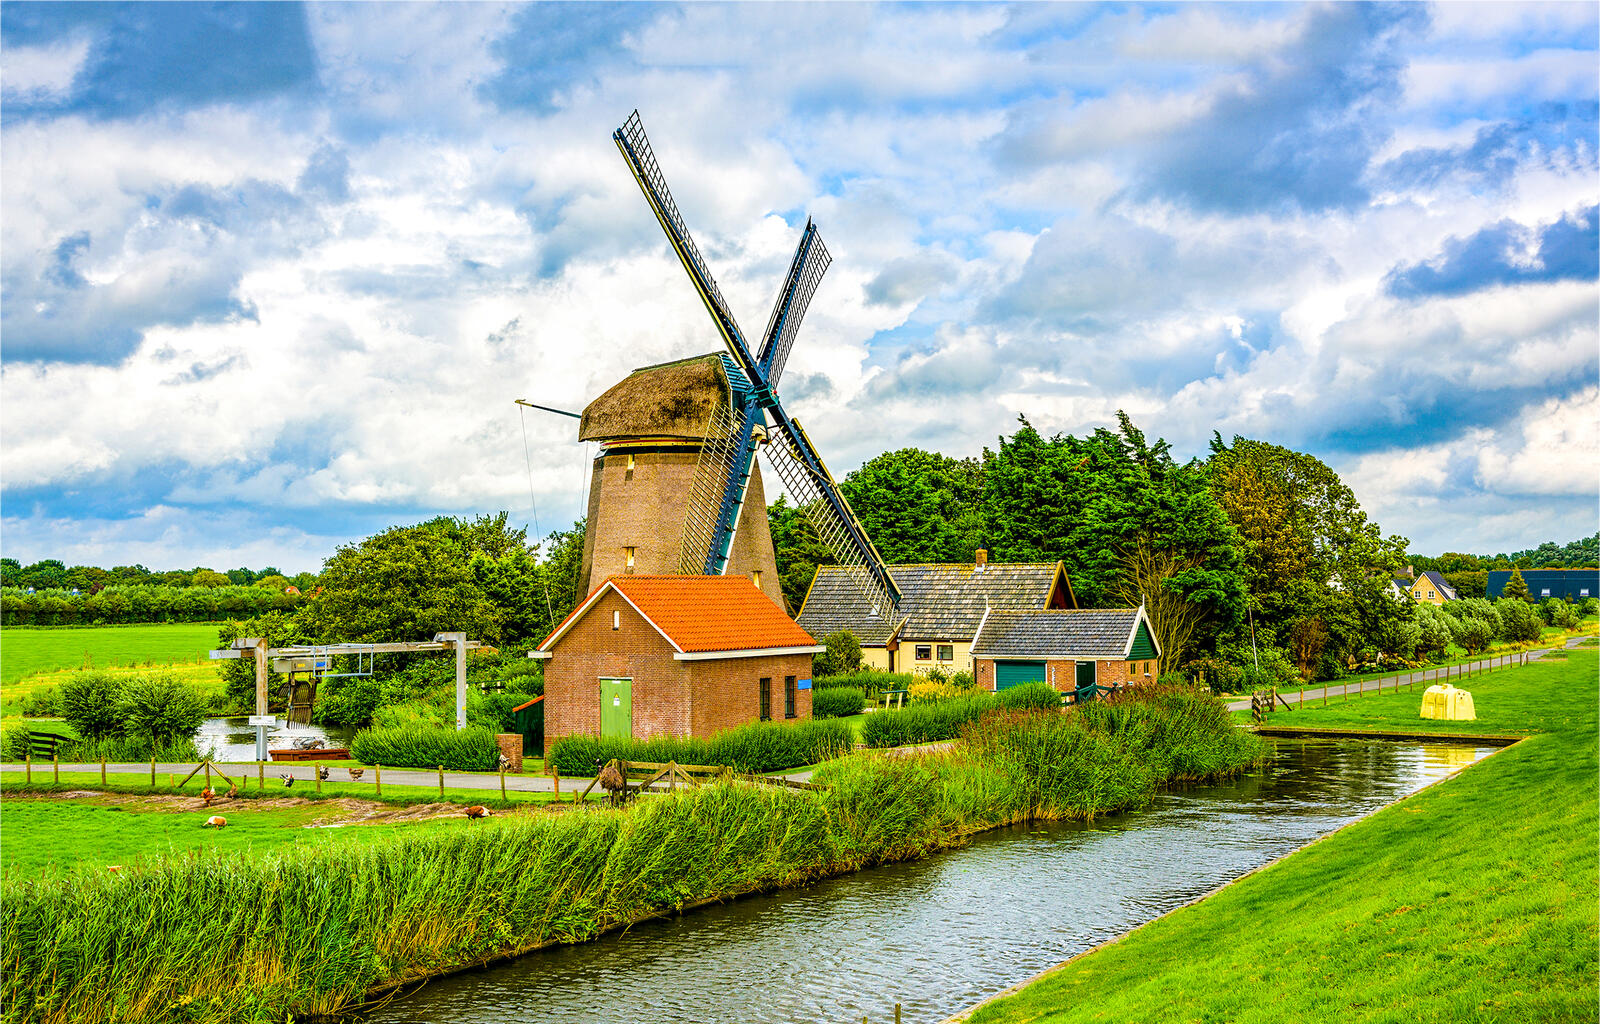 Free photo Windmill in the Netherlands